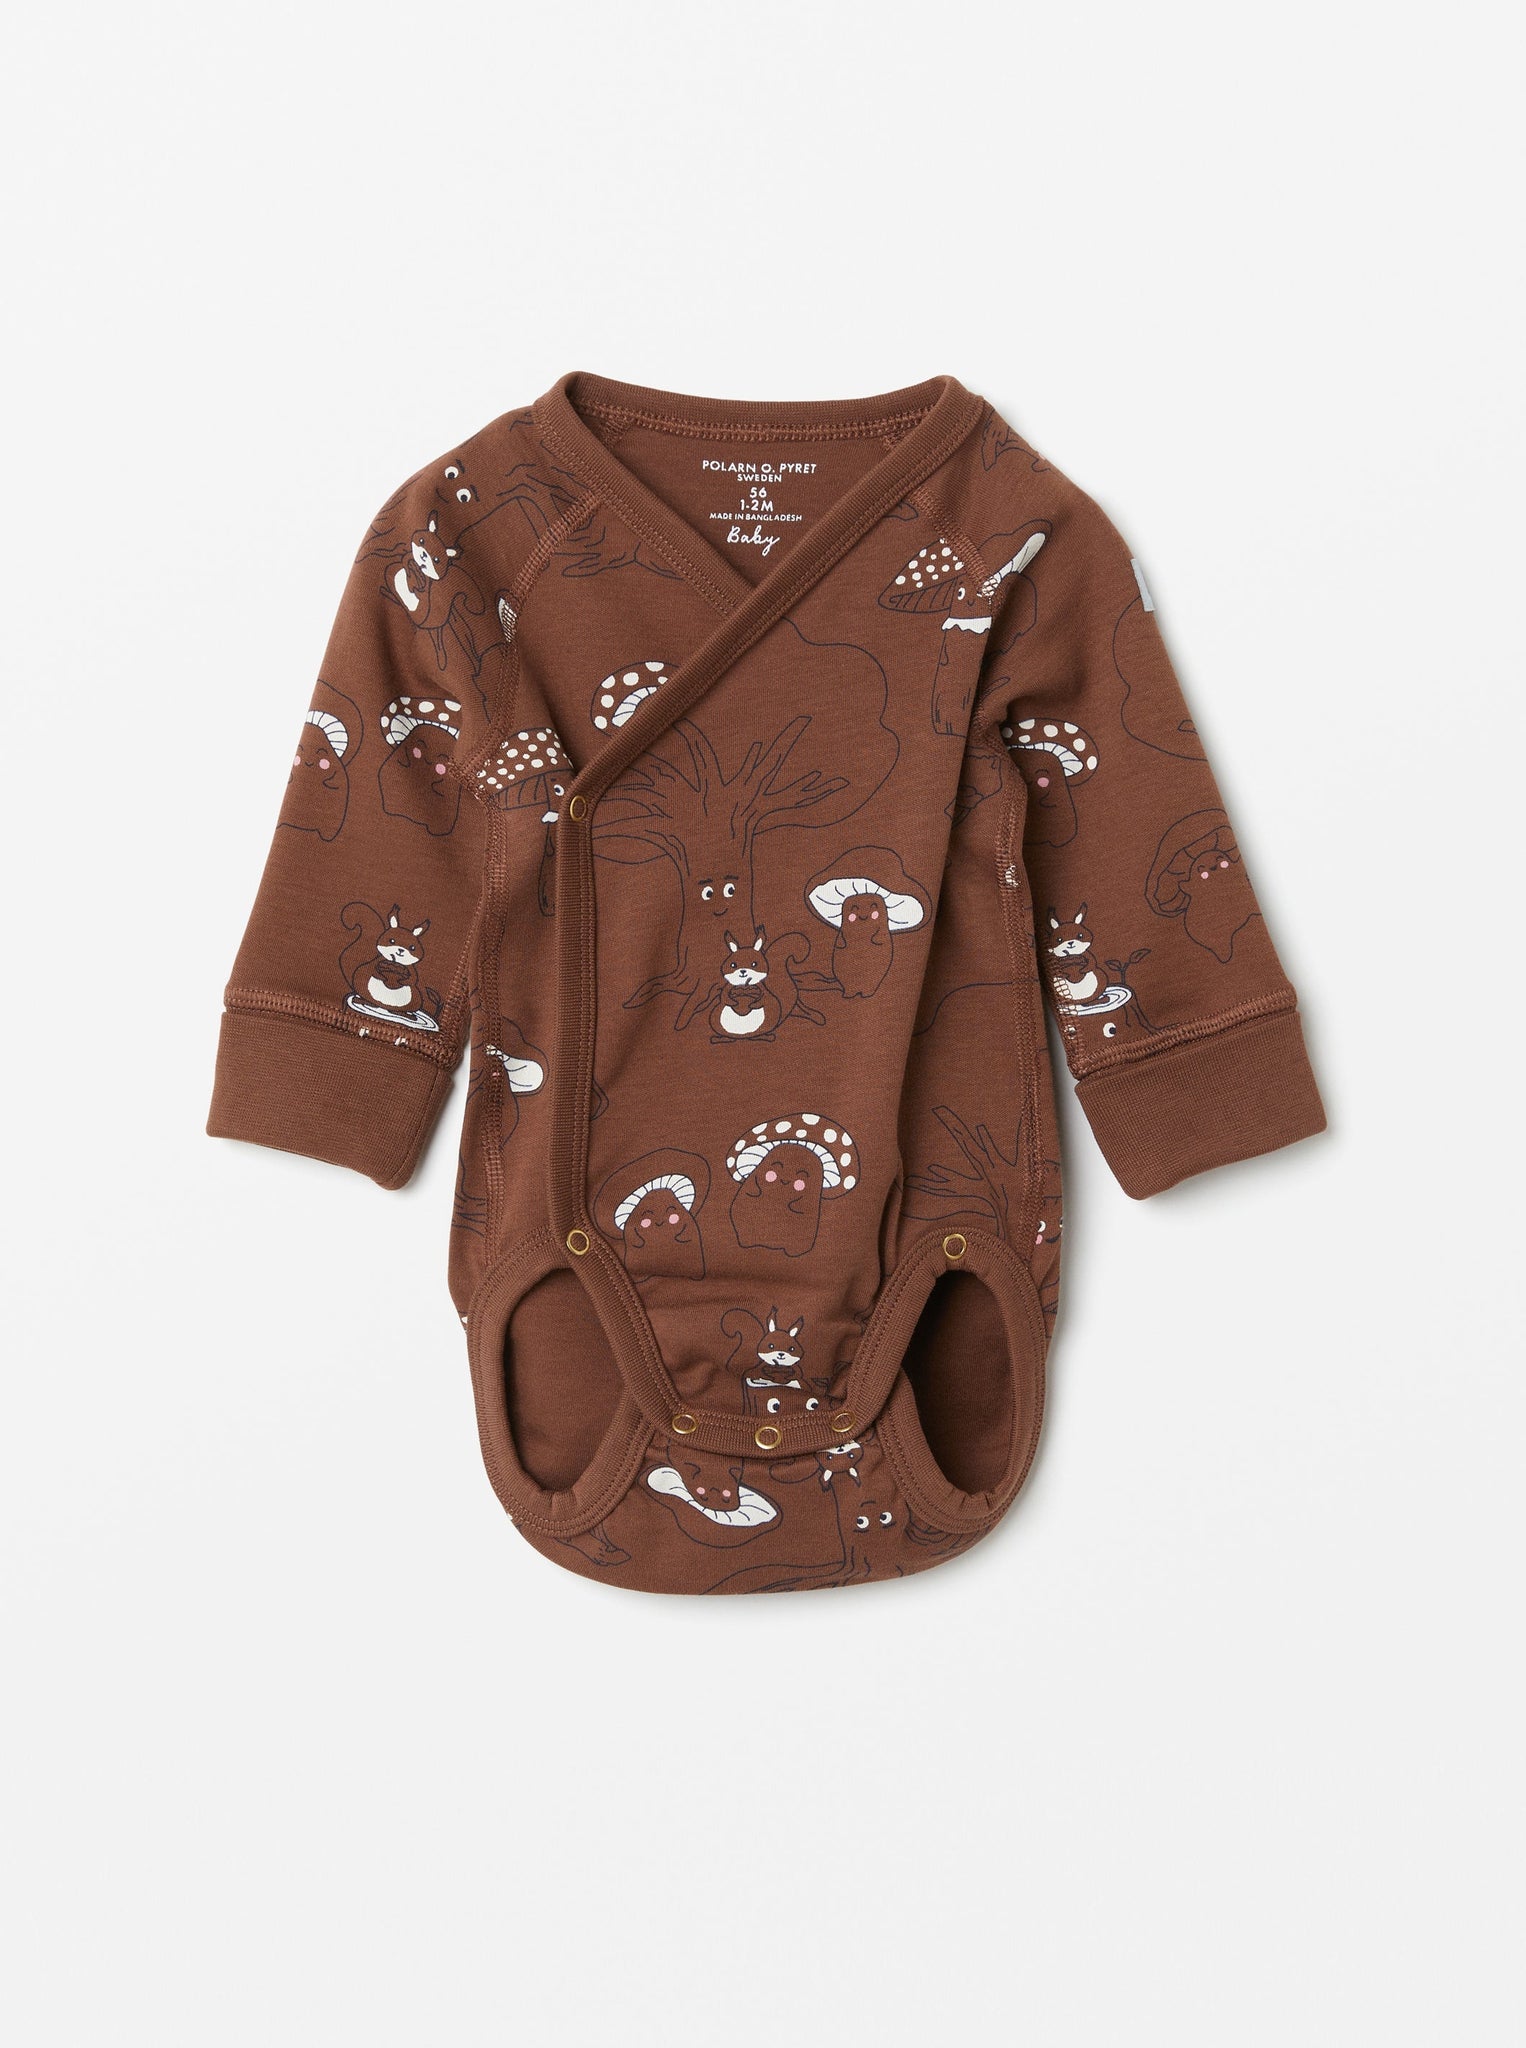 Organic Cotton Wraparound Babygrow from the Polarn O. Pyret babywear collection. Clothes made using sustainably sourced materials.